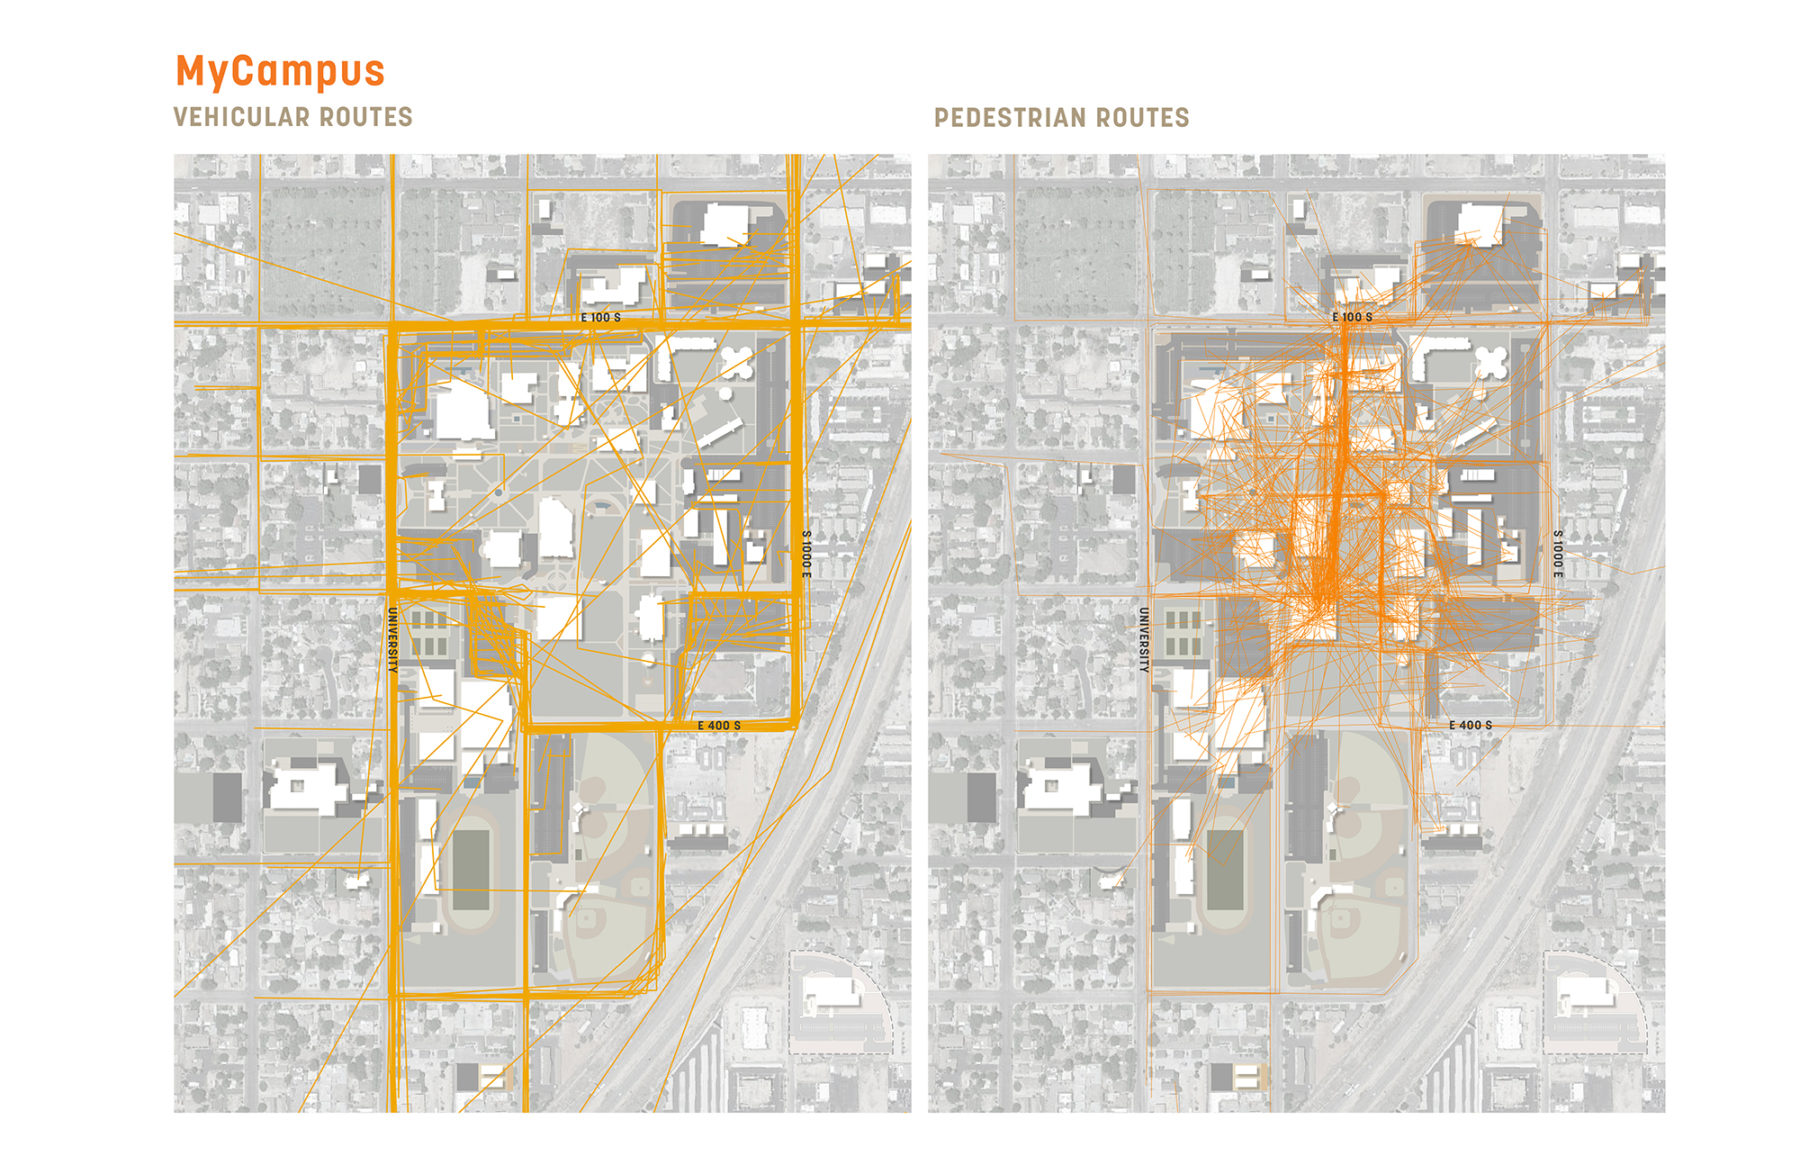 MyCampus: vehicular and pedestrian routes